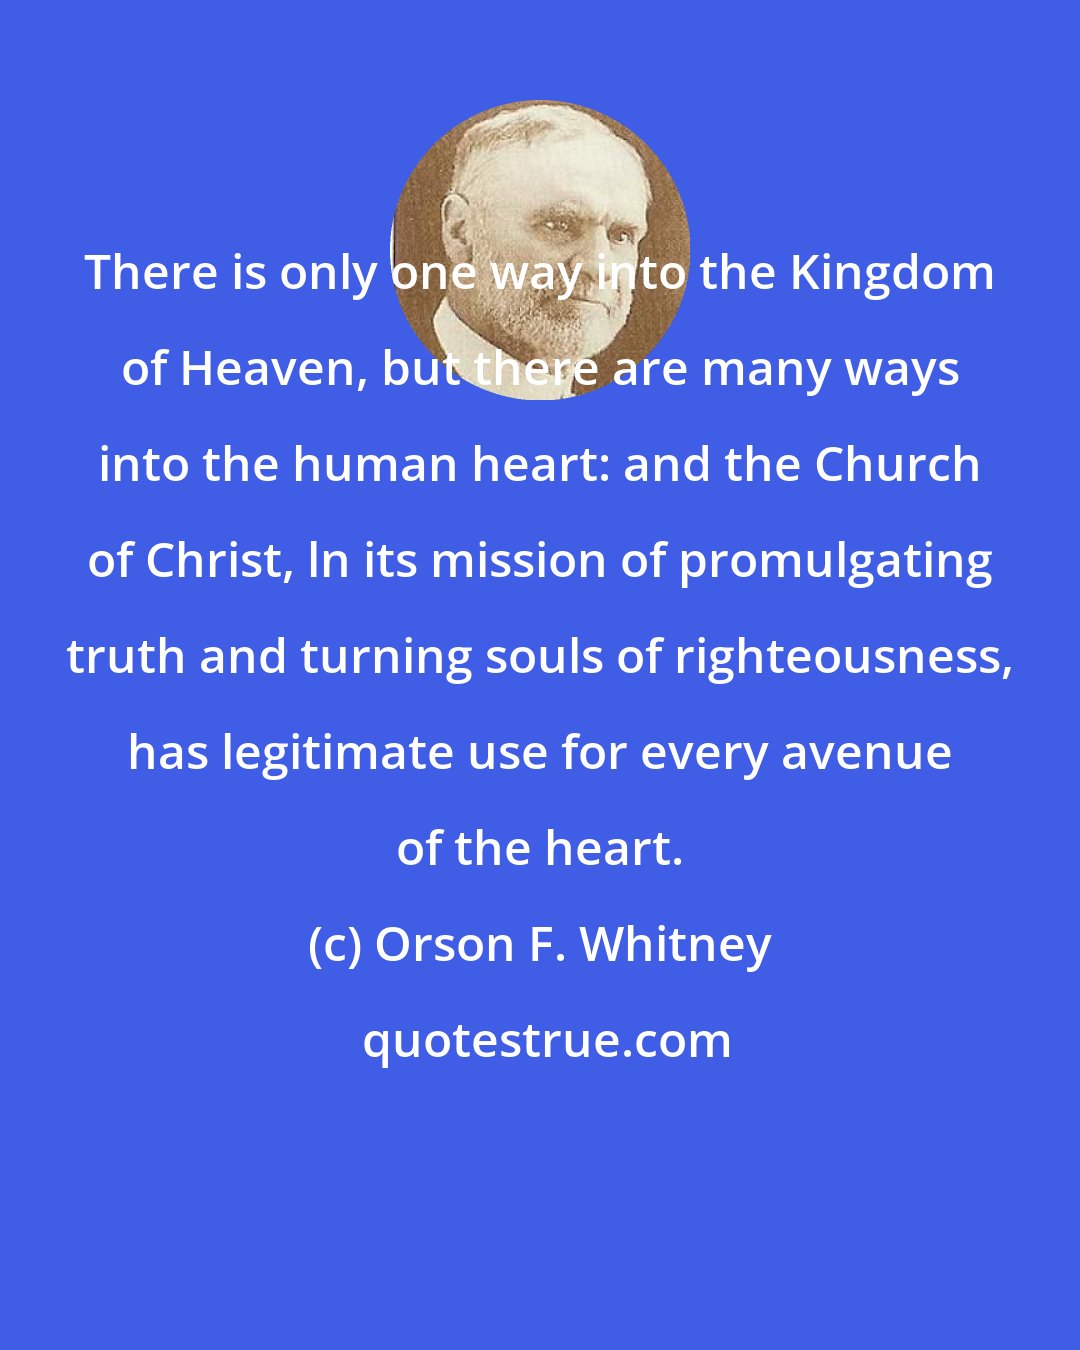 Orson F. Whitney: There is only one way into the Kingdom of Heaven, but there are many ways into the human heart: and the Church of Christ, ln its mission of promulgating truth and turning souls of righteousness, has legitimate use for every avenue of the heart.